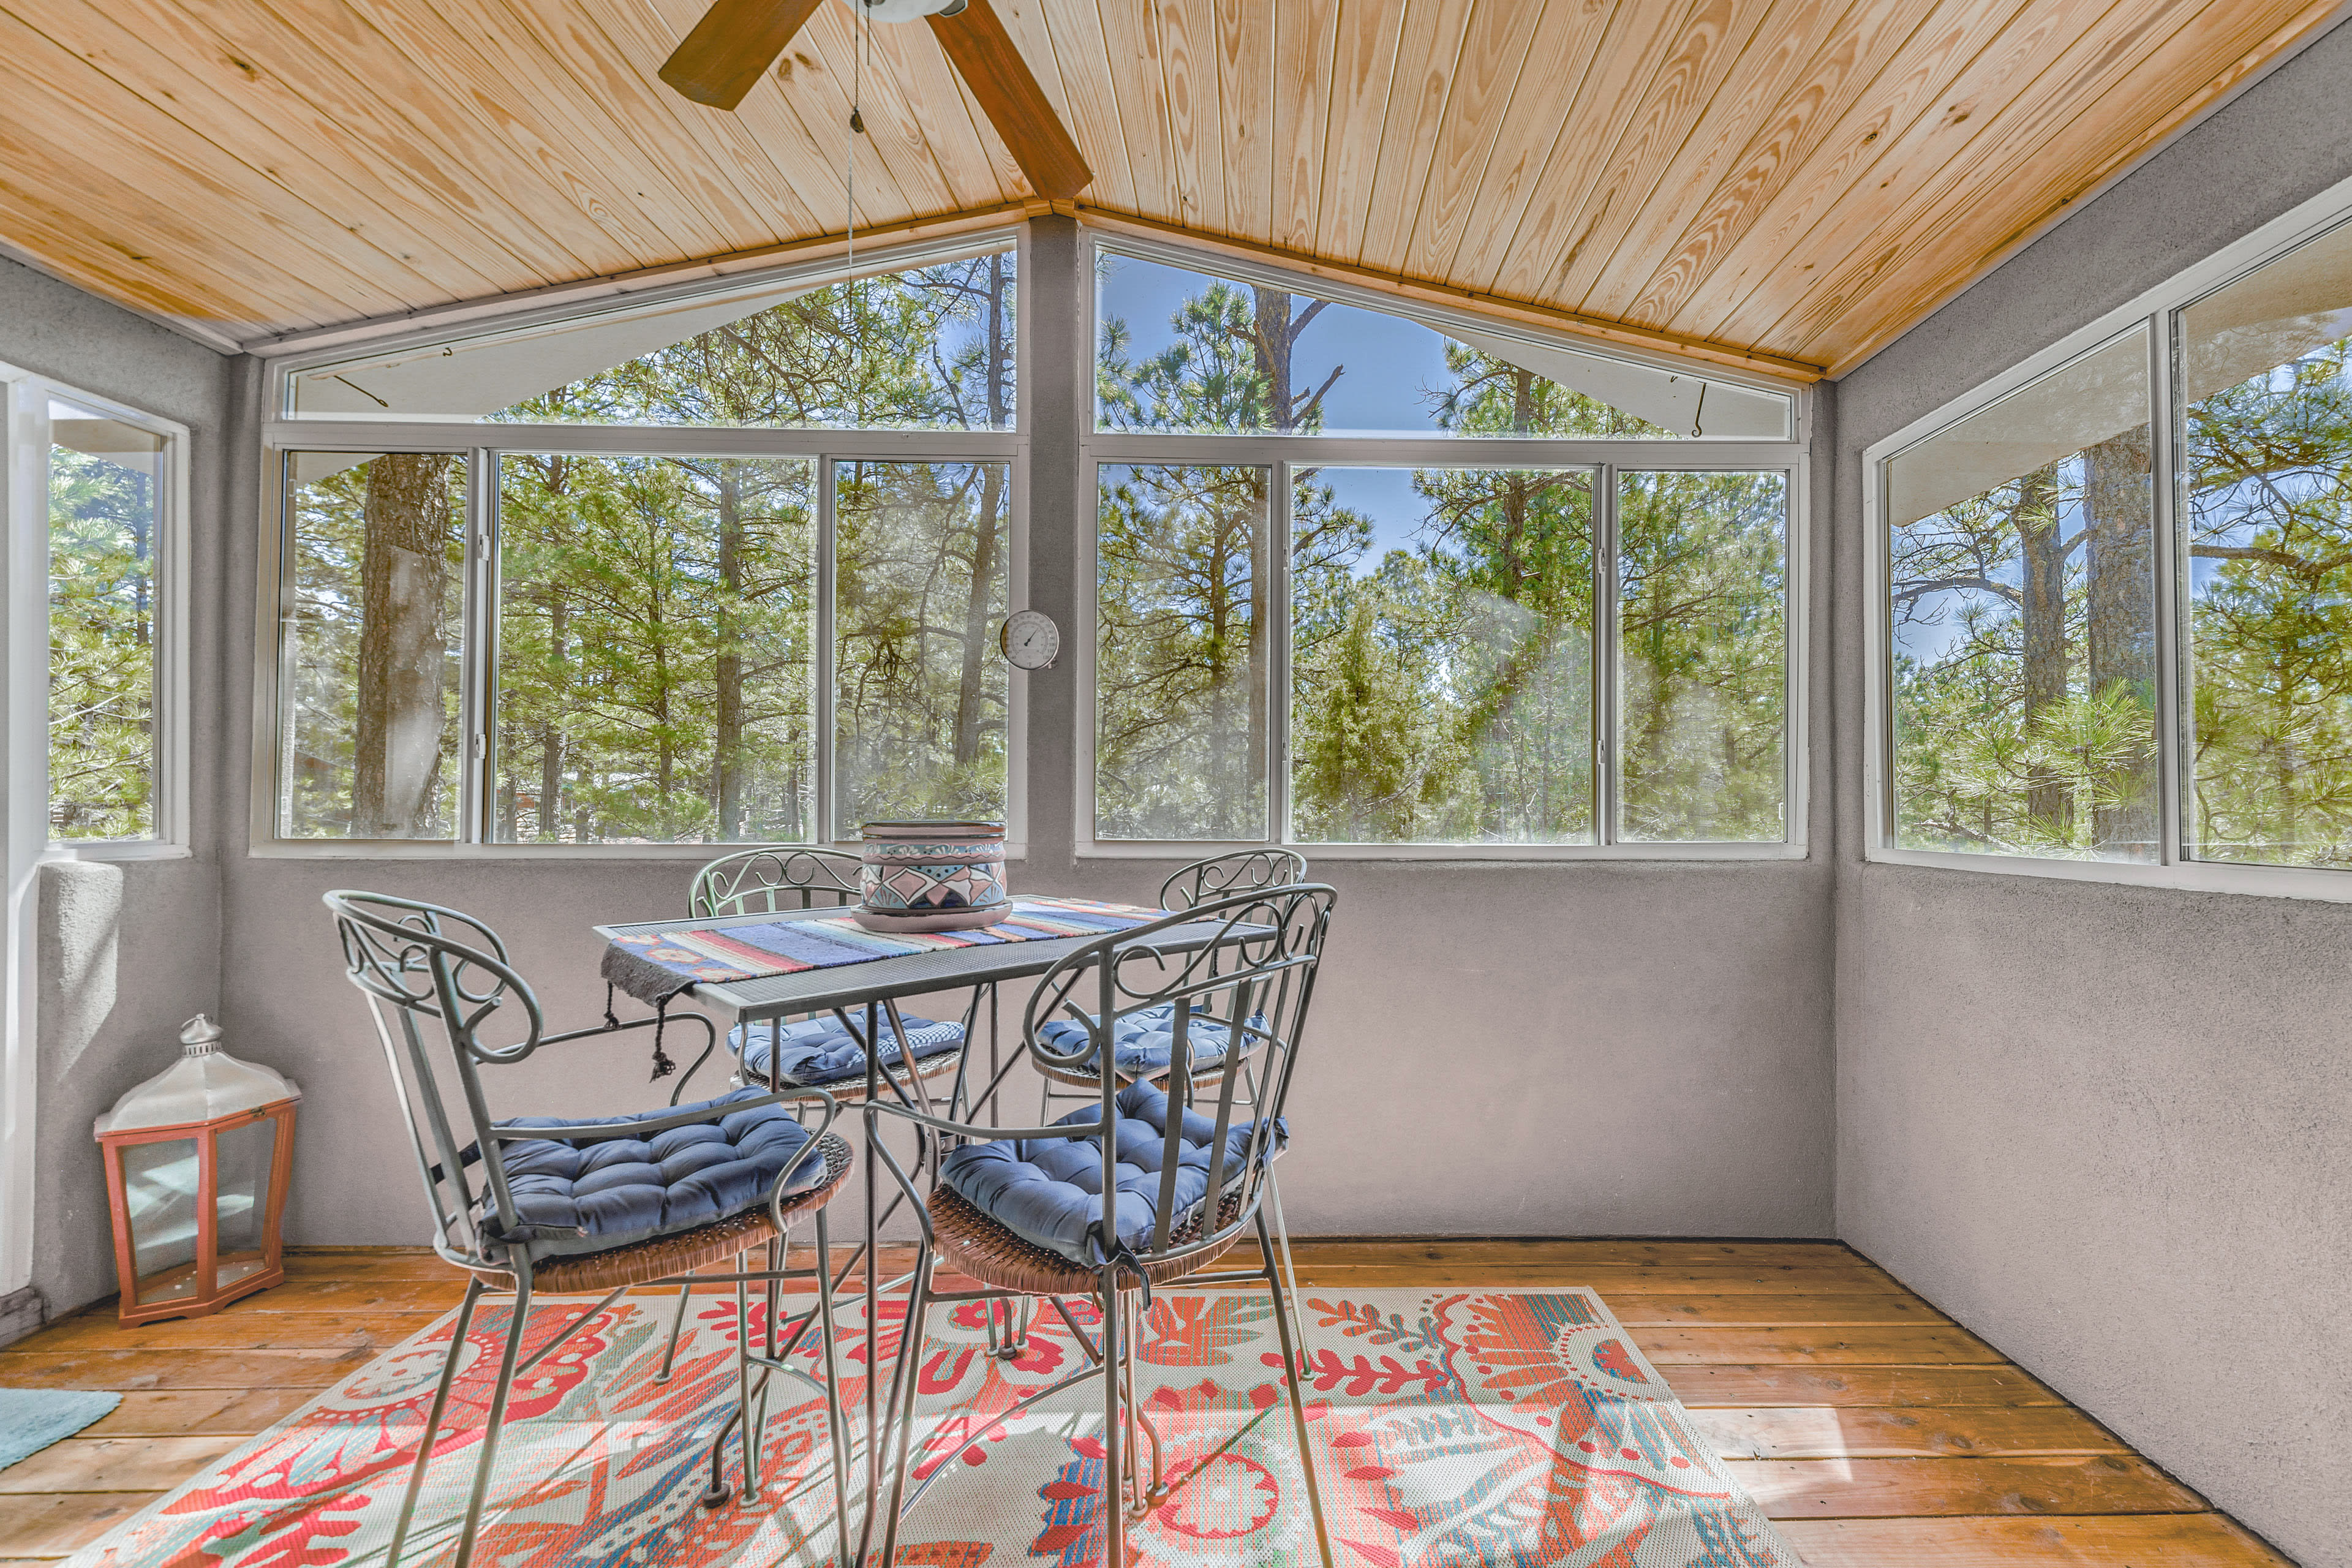 Sunroom | Dining Area | Peaceful Wooded Property